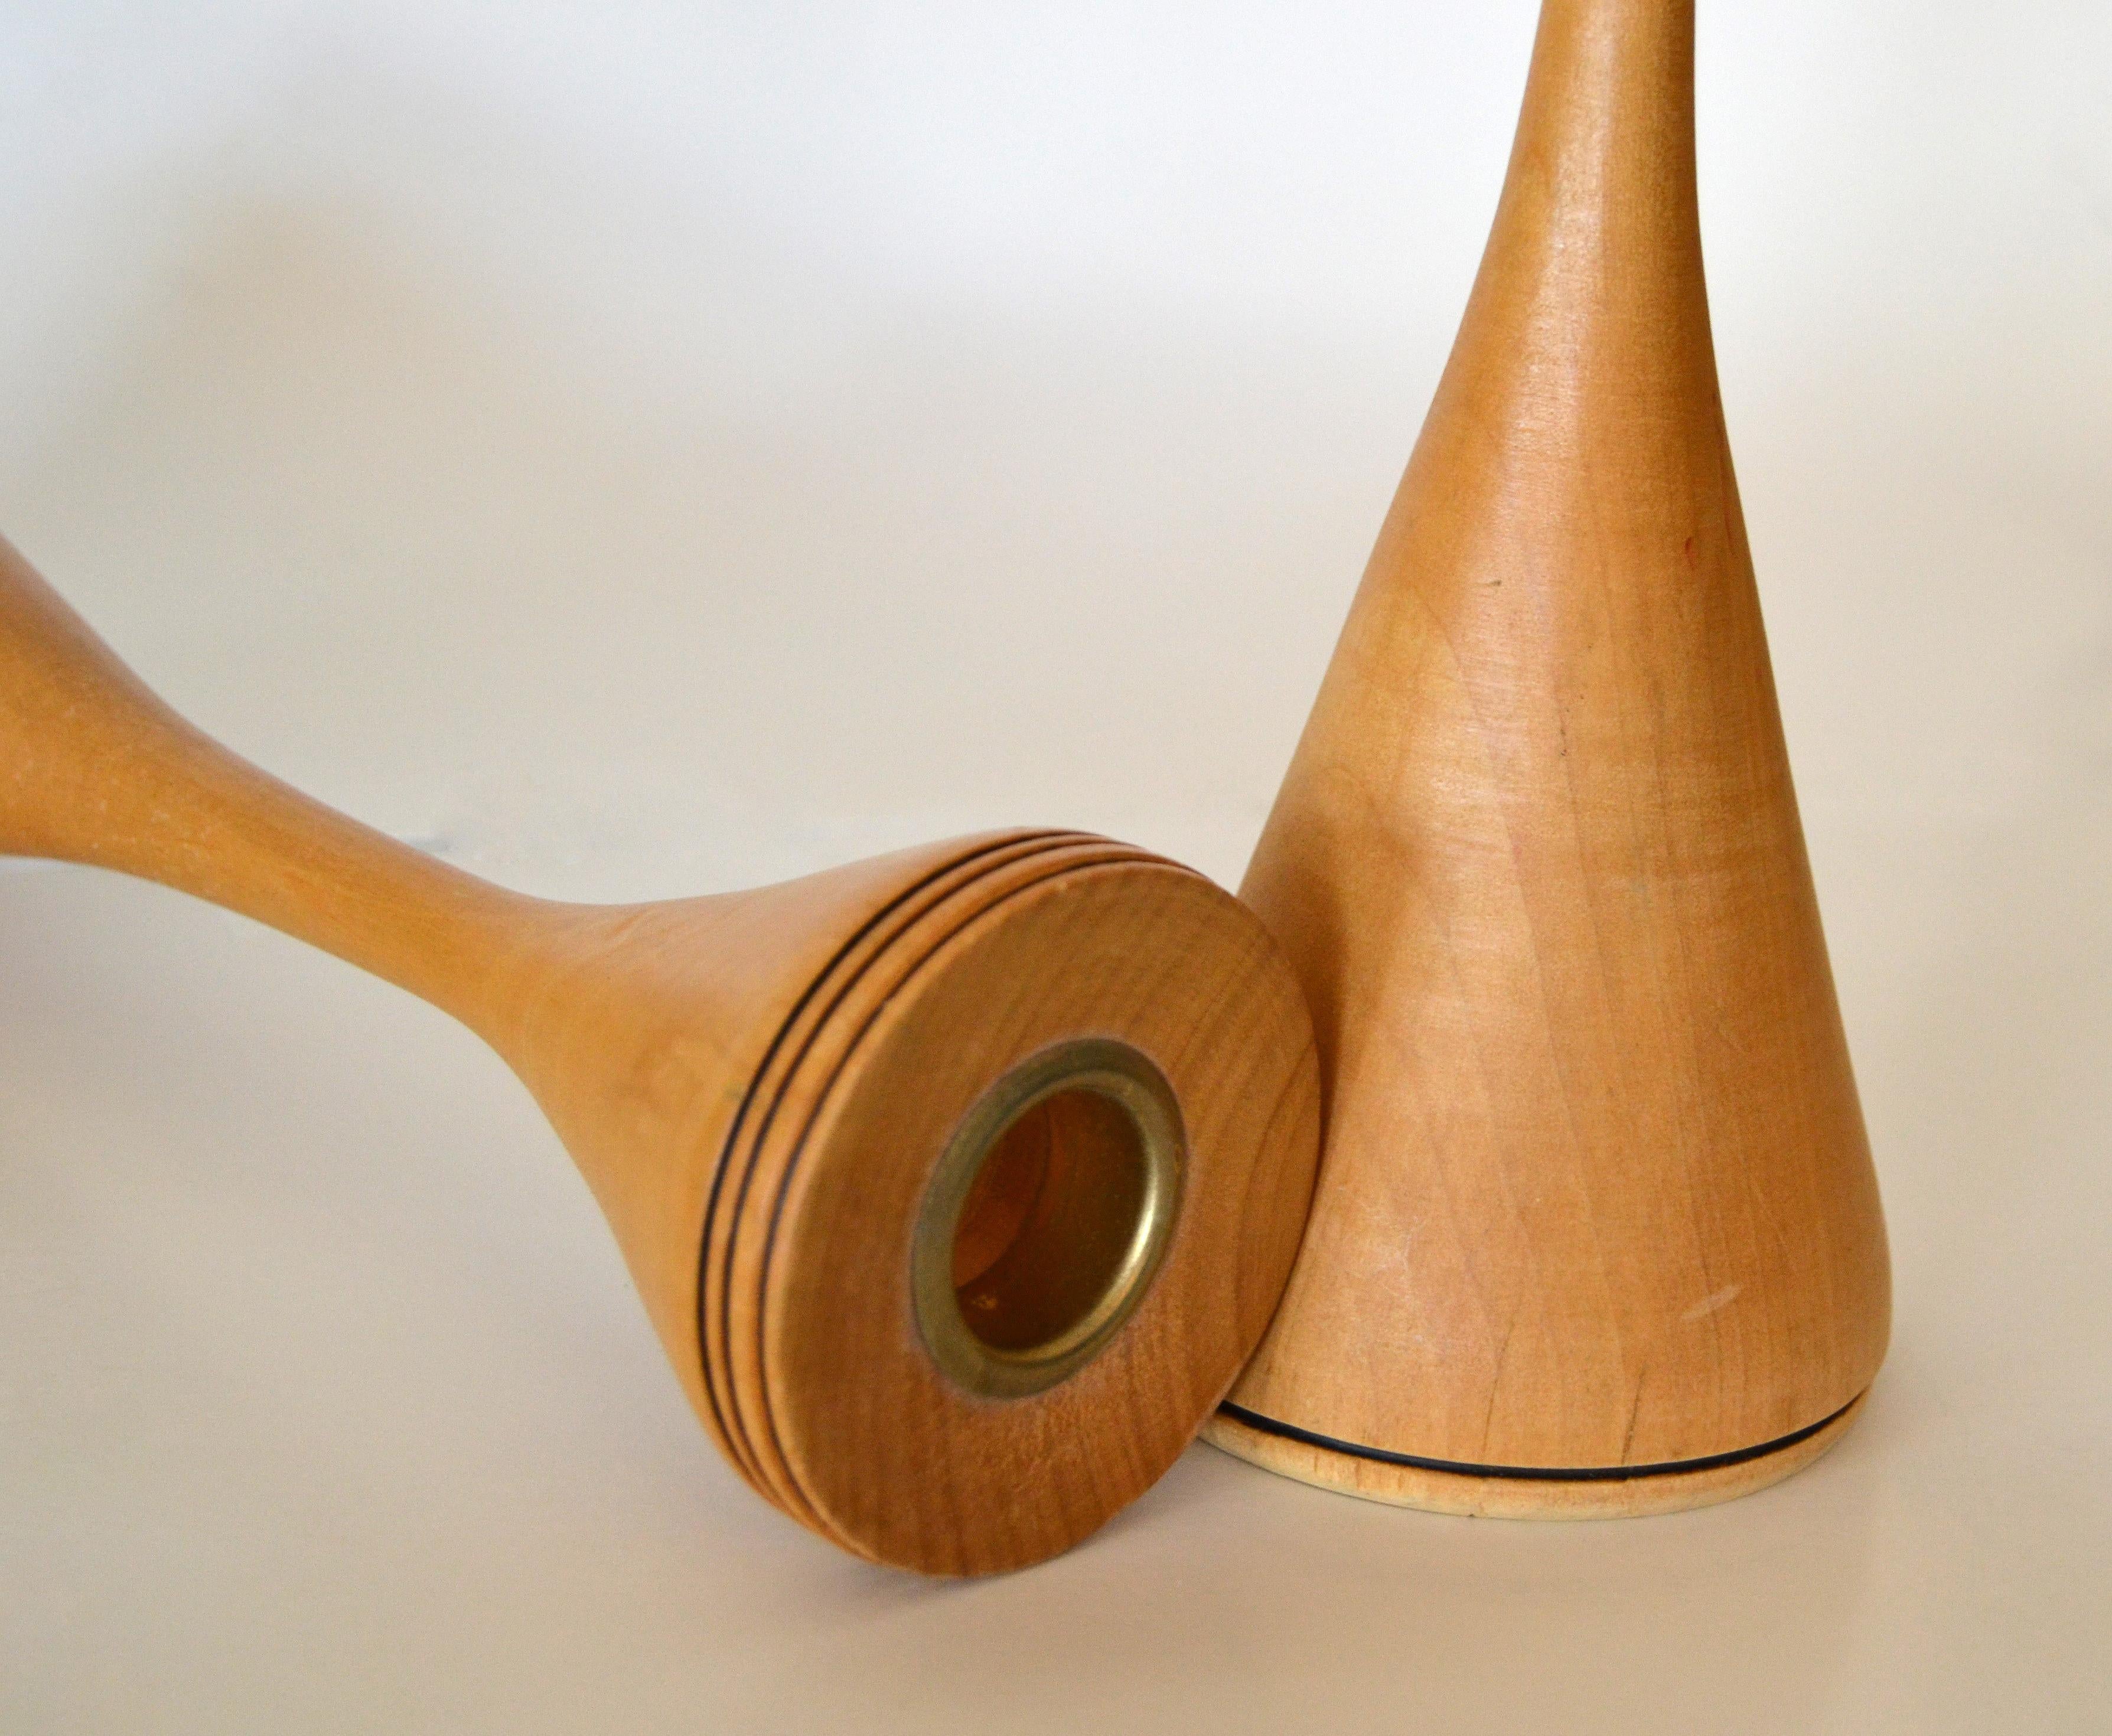 Signed Scandinavian Modern Handcrafted Turned Wood and Brass Candleholders, Pair For Sale 2